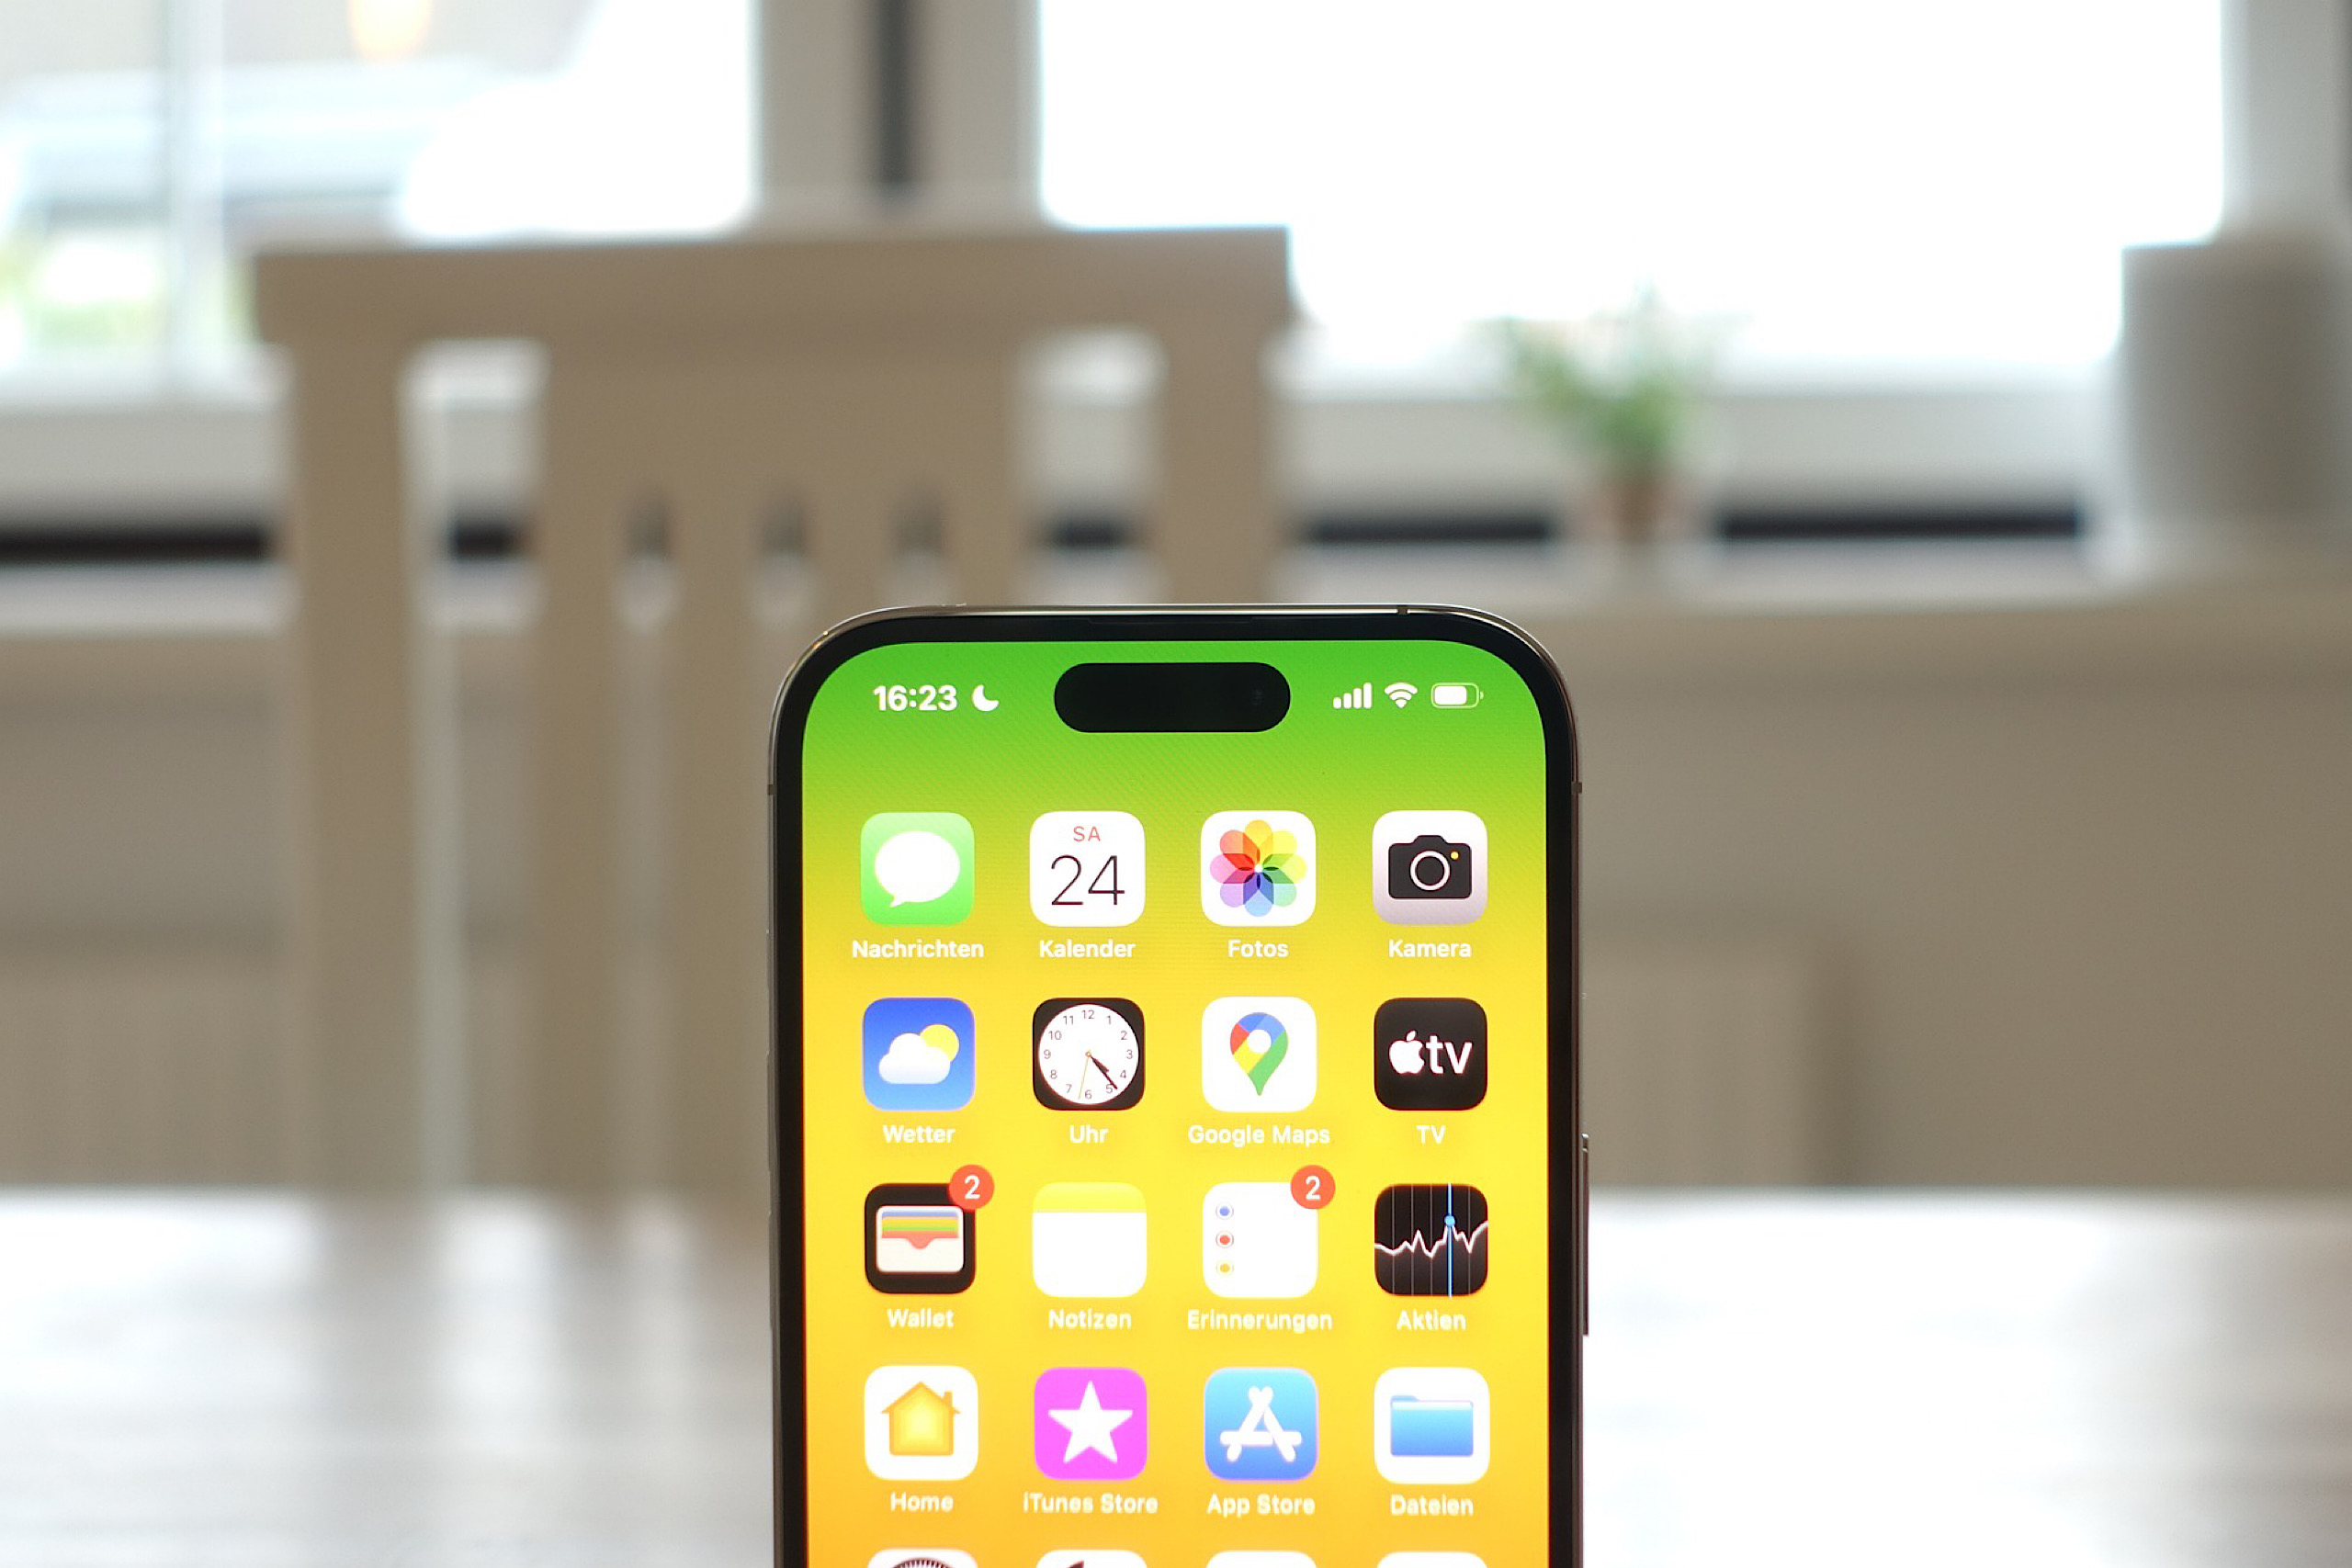 Could the iPhone 14 Pro’s Dynamic Island present an opportunity for marketers